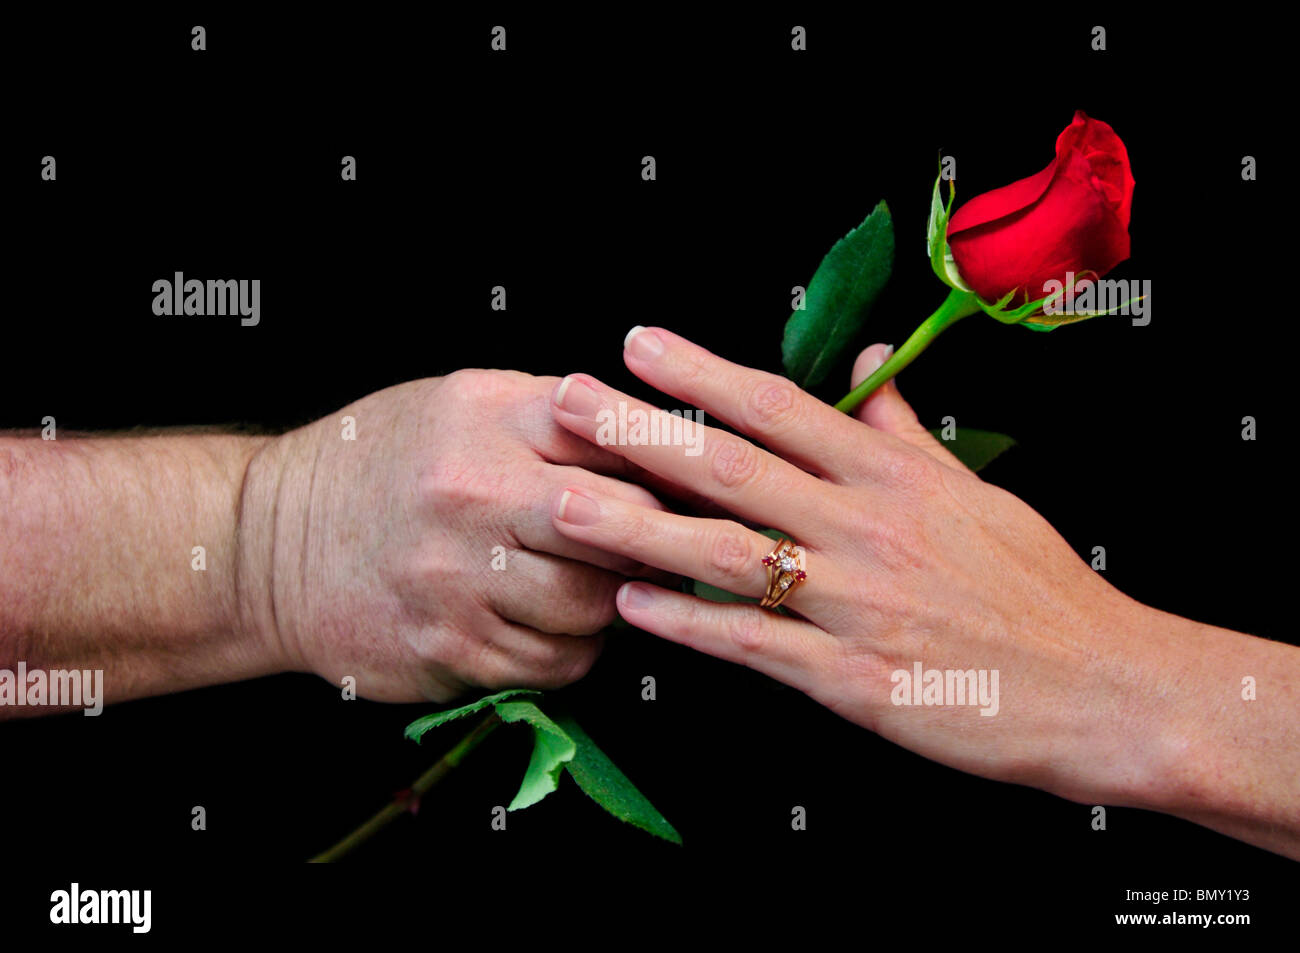 A man lovingly hands his wife a garden rose. Cutout, black background. Hands only. Stock Photo